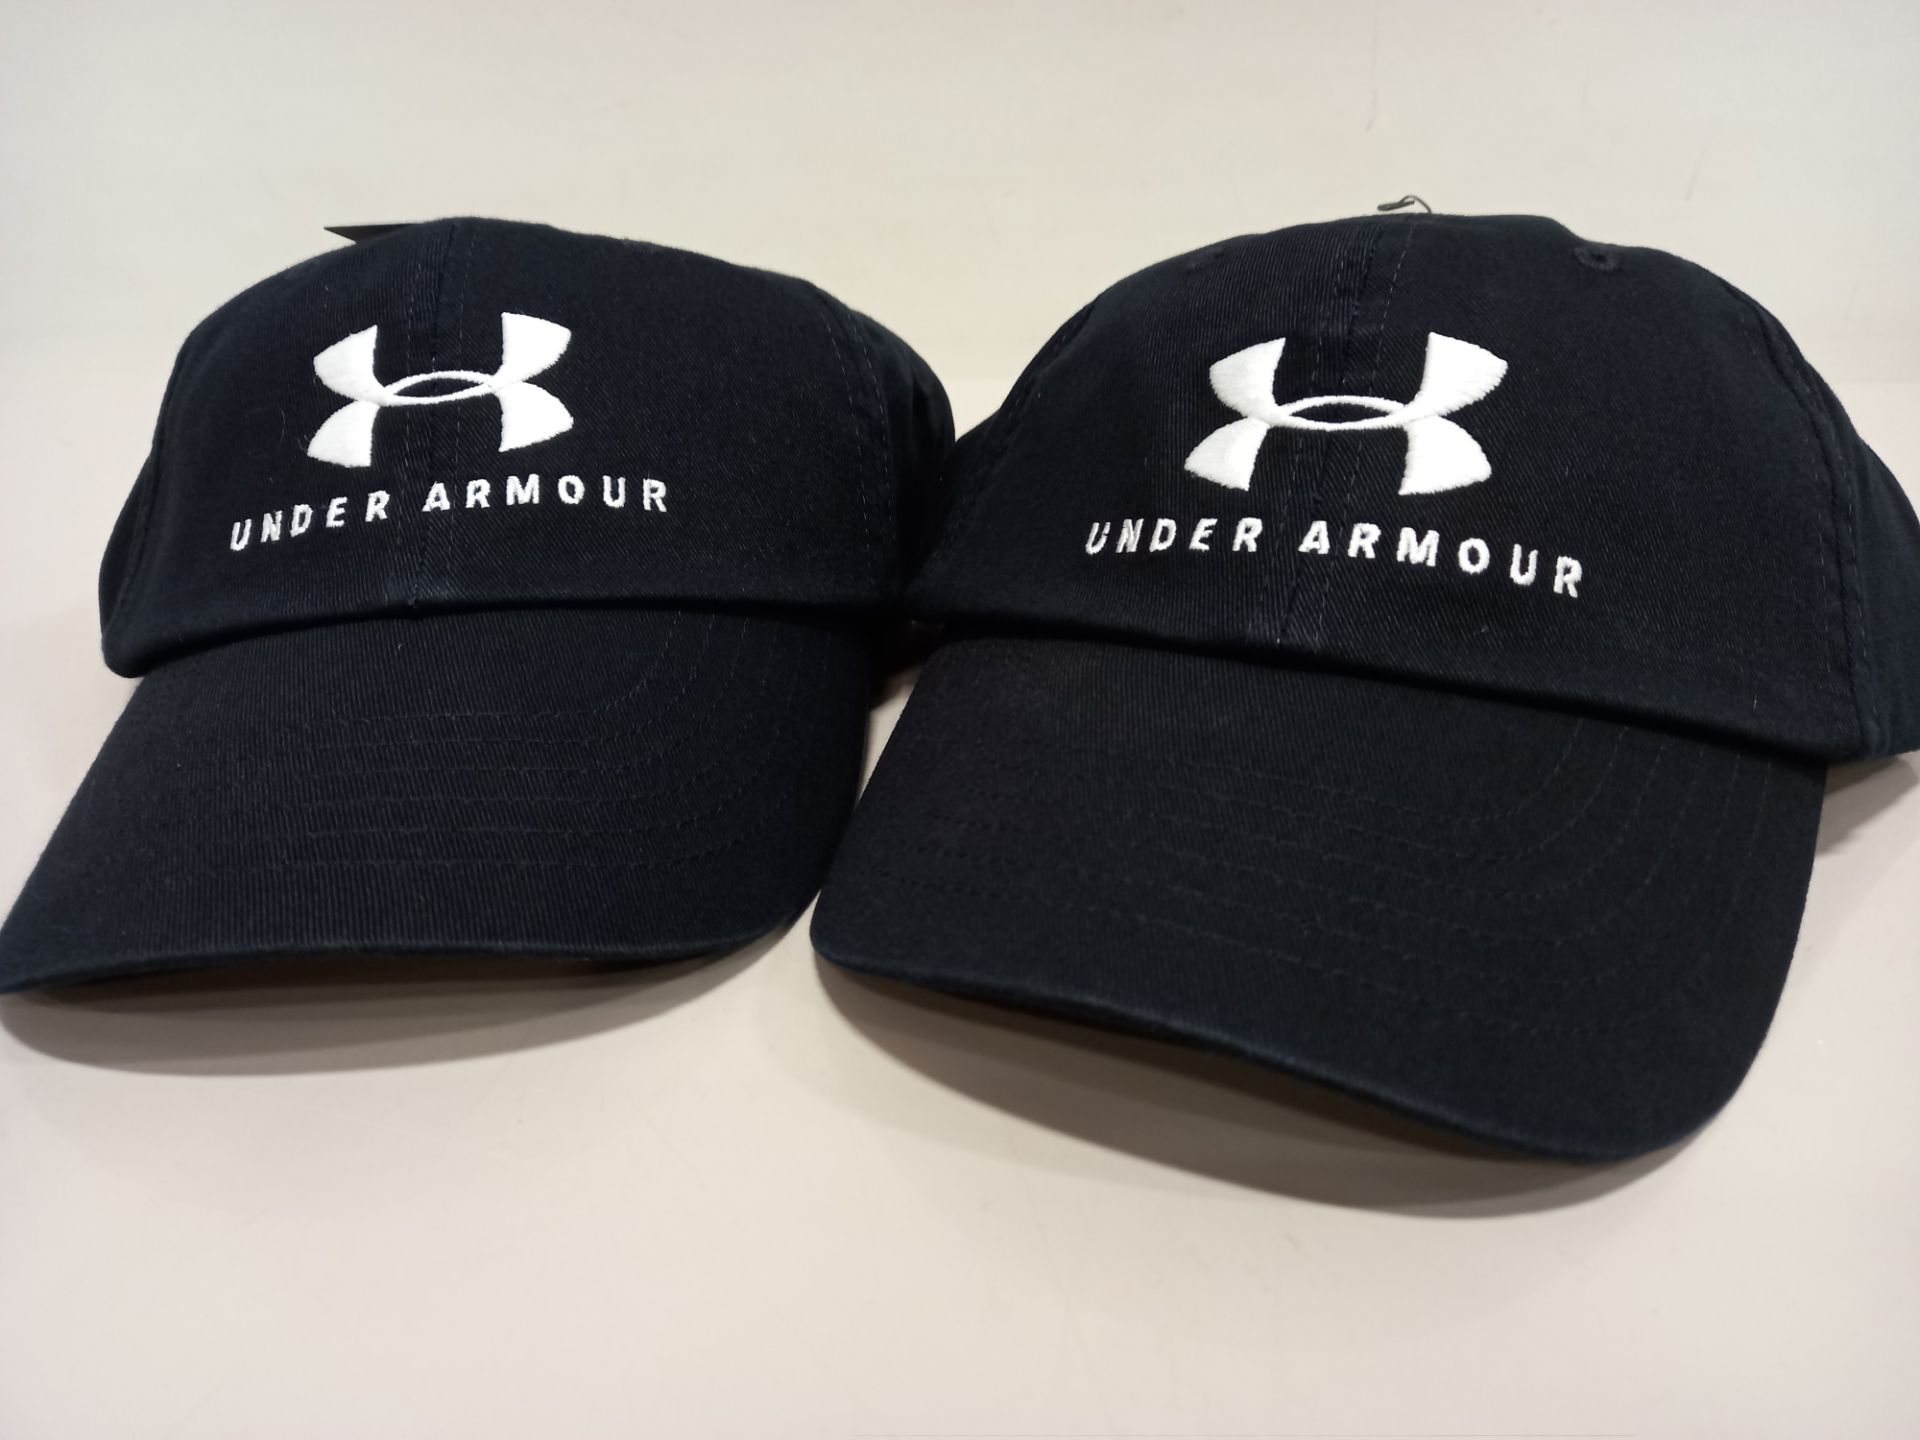 15 X BRAND NEW BAGGED UNDER ARMOUR BLACK CAPS - WOMEN'S - (PICK LOOSE) RRP £17.99 EACH - TOTAL £